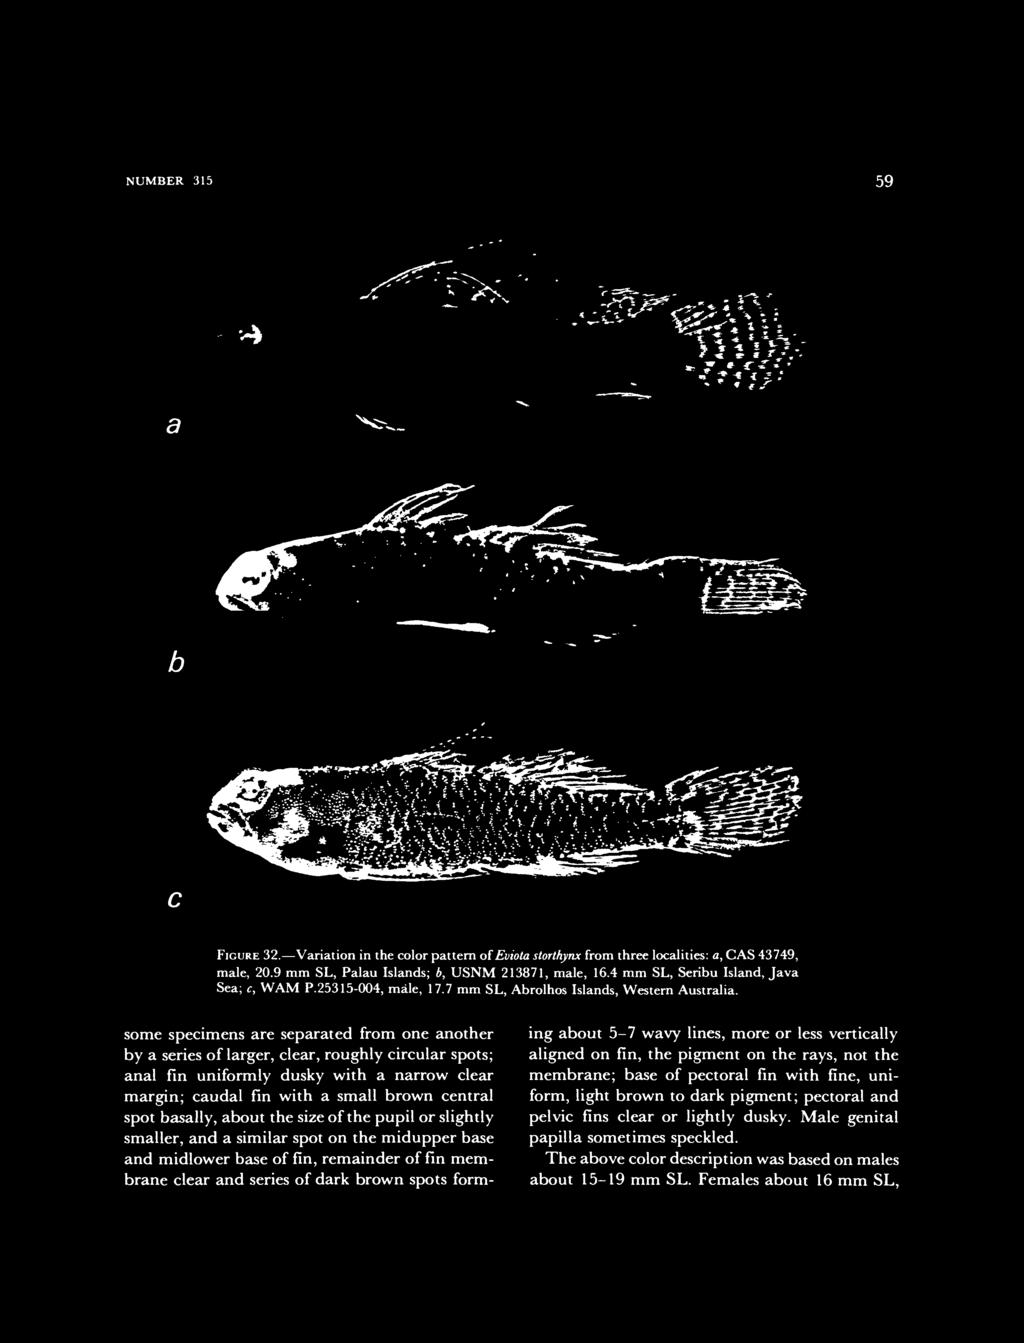 some specimens are separated from one another by a series of larger, clear, roughly circular spots; anal fin uniformly dusky with a narrow clear margin; caudal fin with a small brown central spot